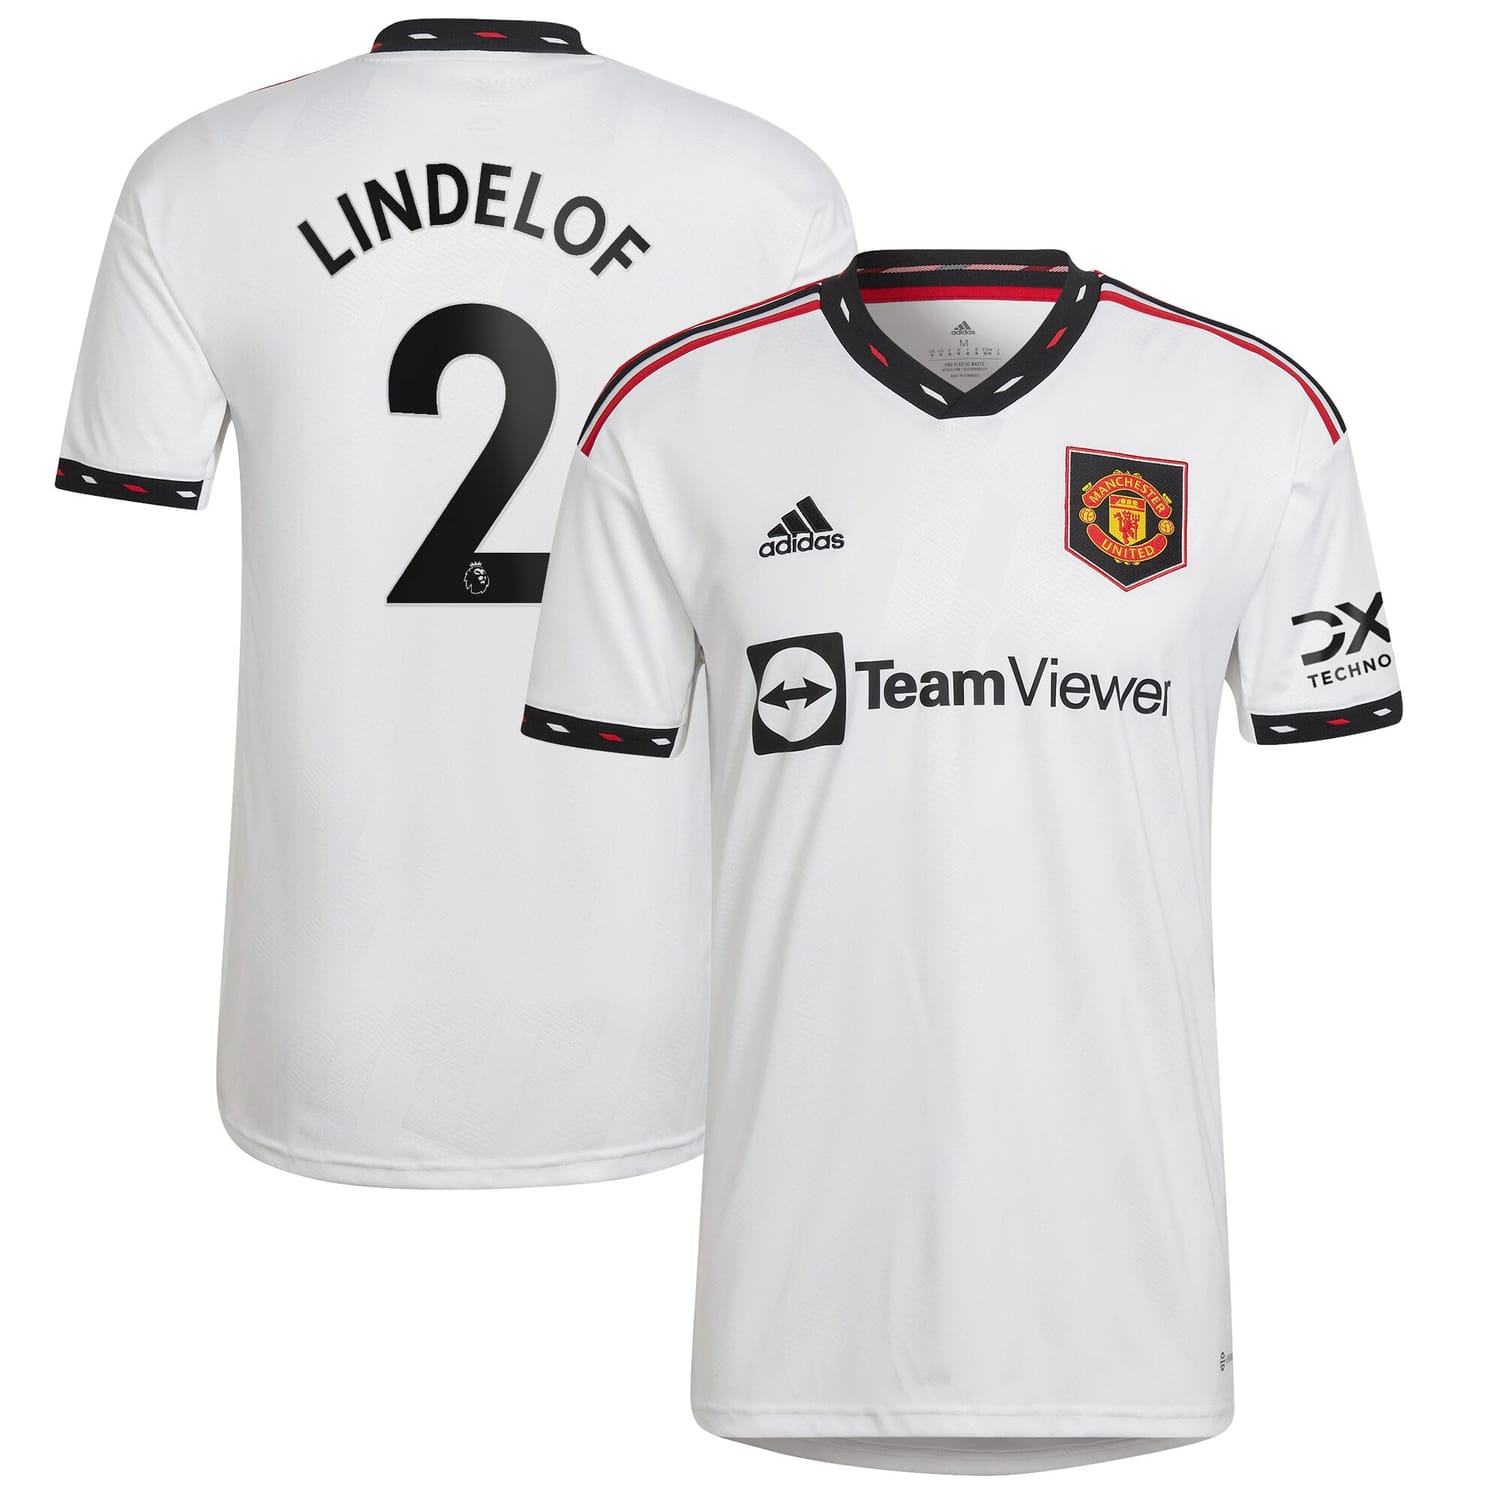 Premier League Manchester United Away Jersey Shirt White 2022-23 player Victor Lindelöf printing for Men